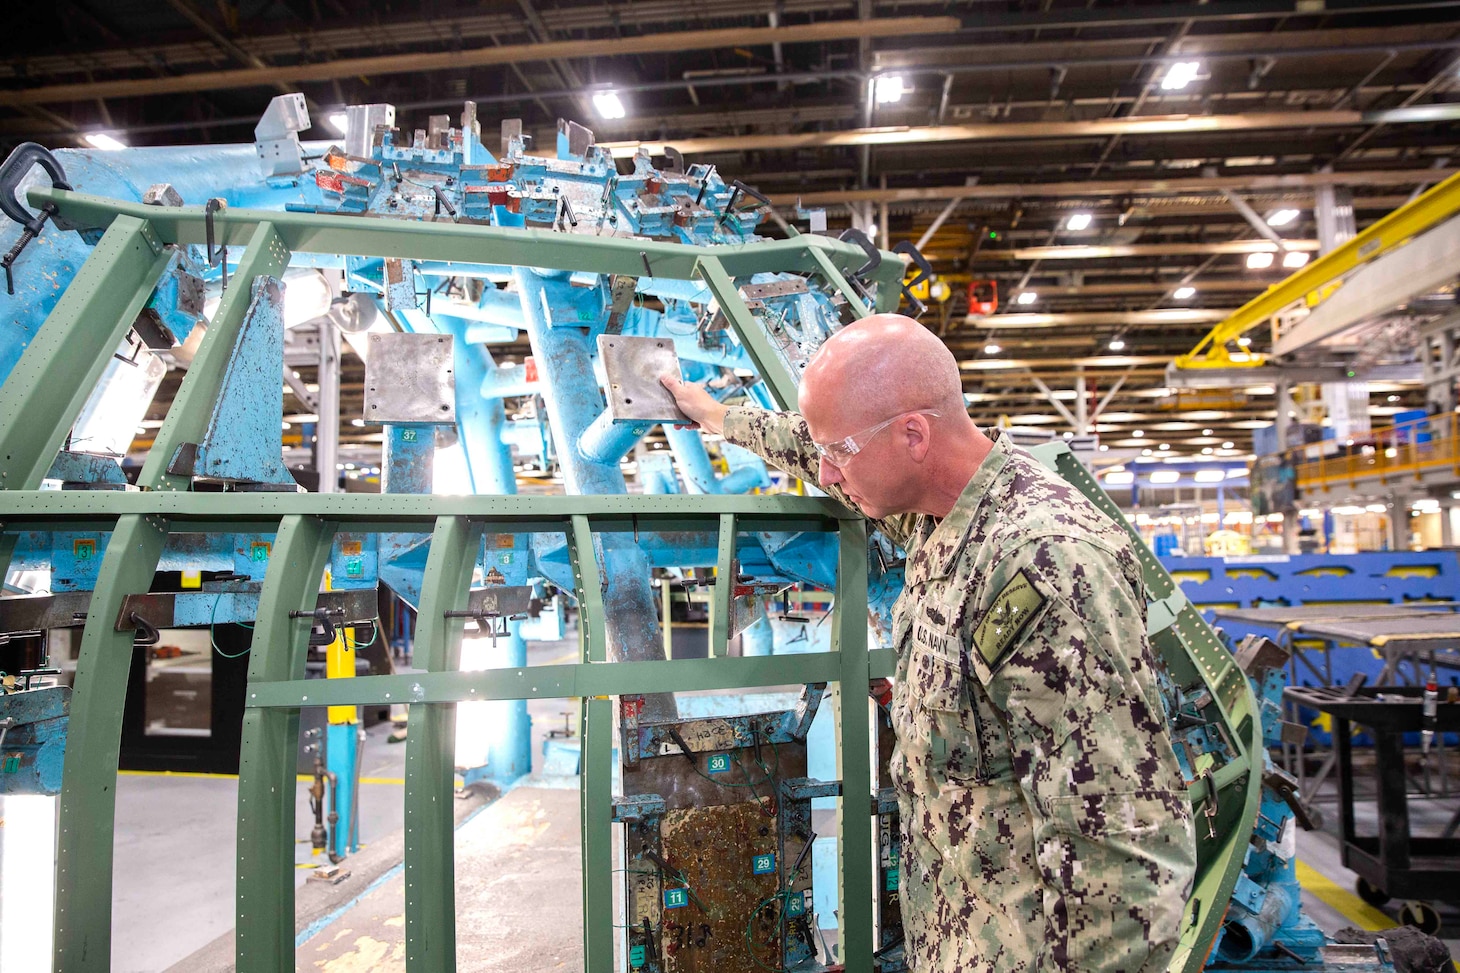 Rear Admiral Luke Frost, Director, Reserve Warfare, Office of the Chief of Navy Reserve, inspects the airframe of a C-130J Hercules during his visit to the historic United States Air Force Plant 6 in Marietta, Georgia, the production facility for the latest generation of the C-130 Hercules.; Lockheed Martin Photography by David L. Key. November 8, 2022